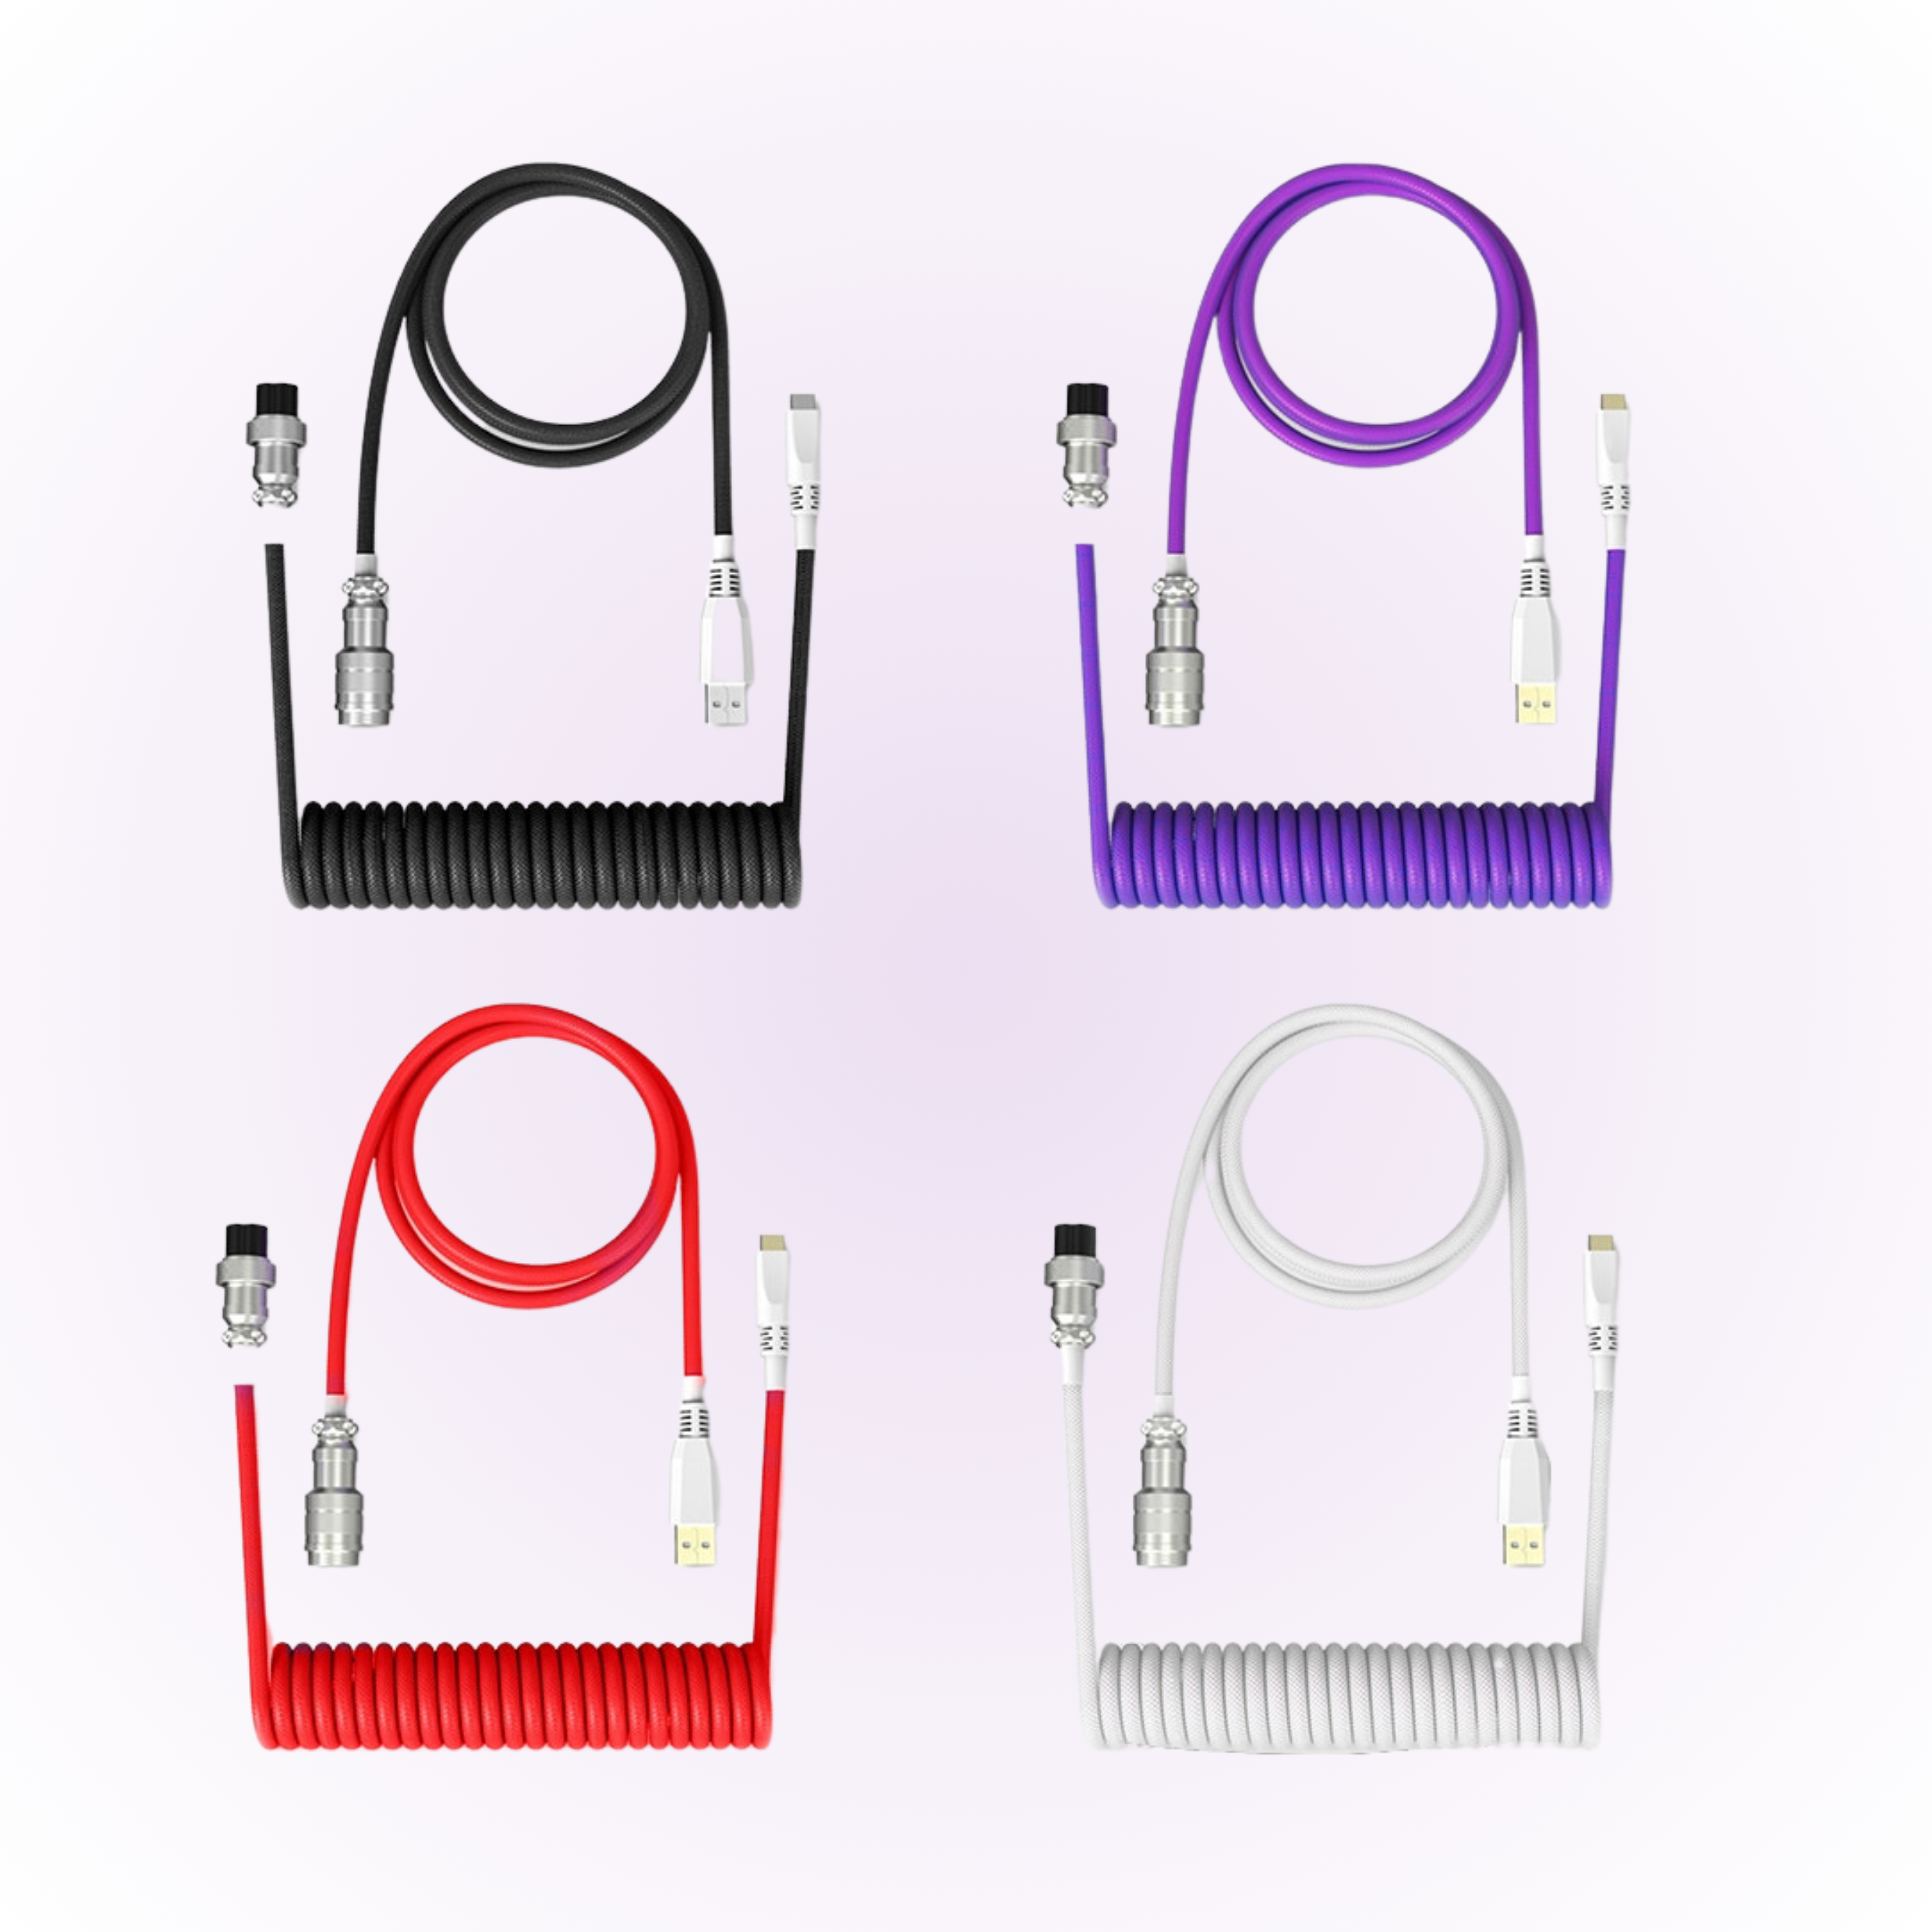 black, purple, red and white mechanical keyboard coiled cables